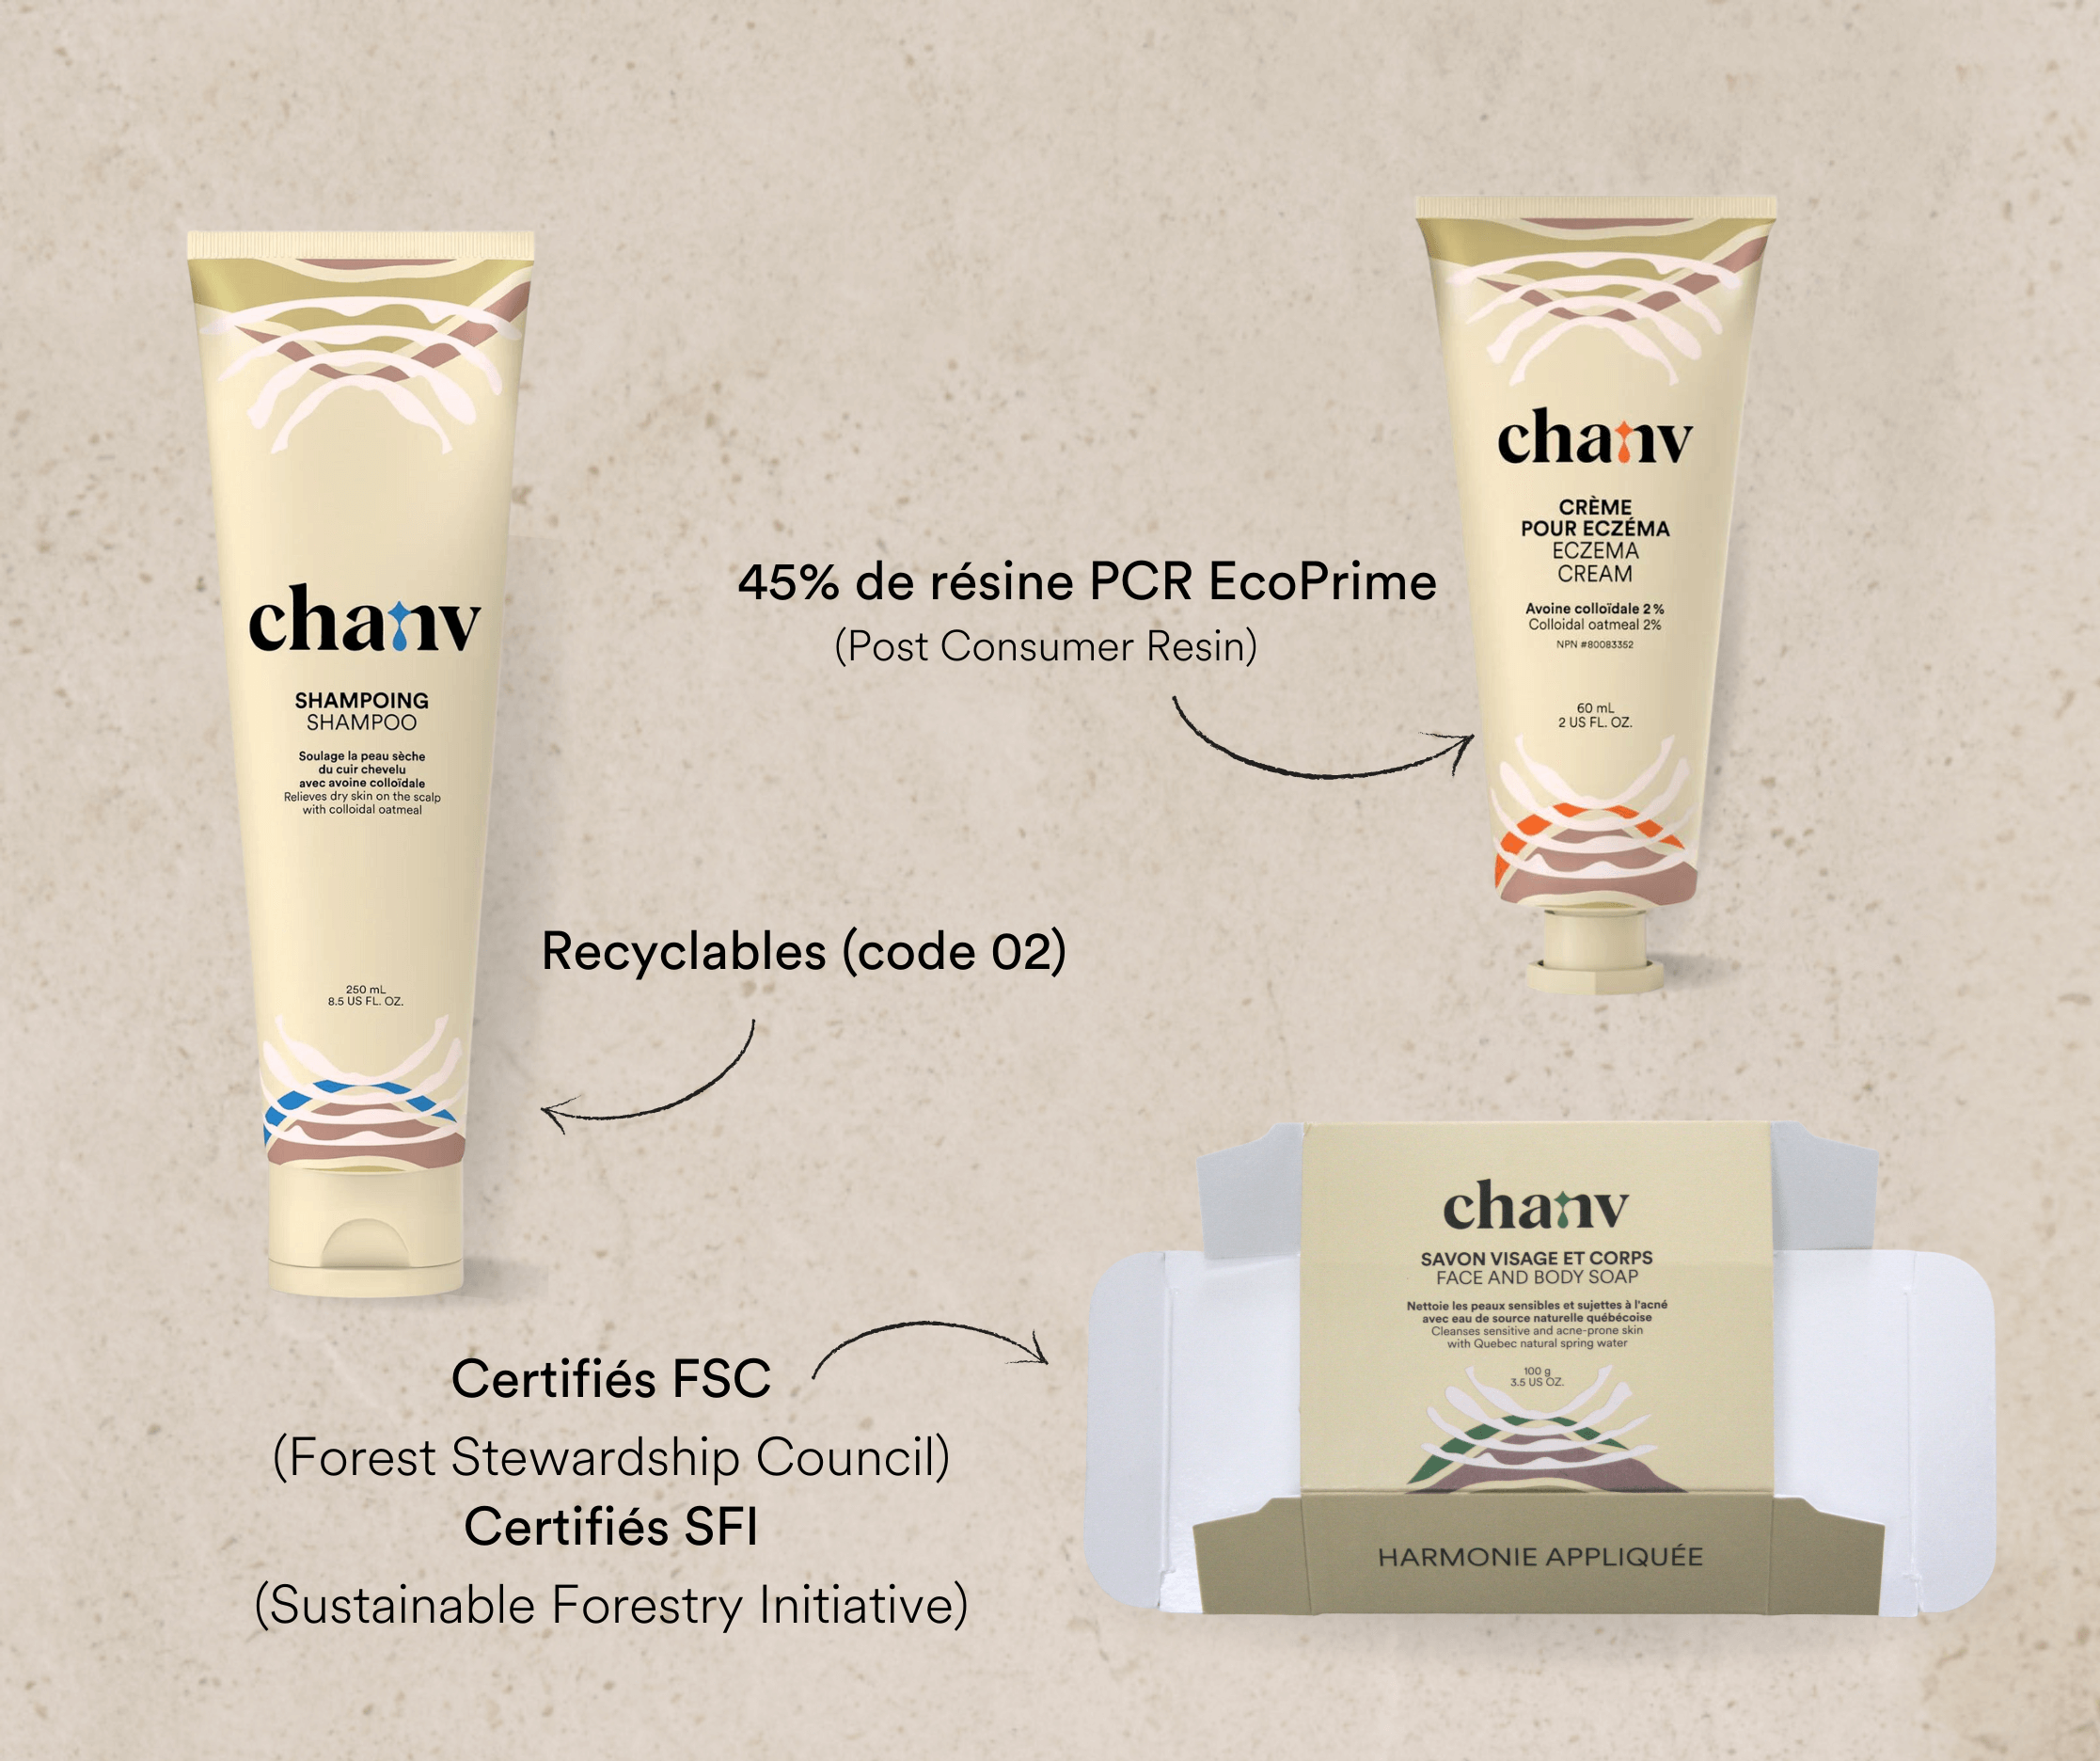 Chanv packaging: designed to protect the planet